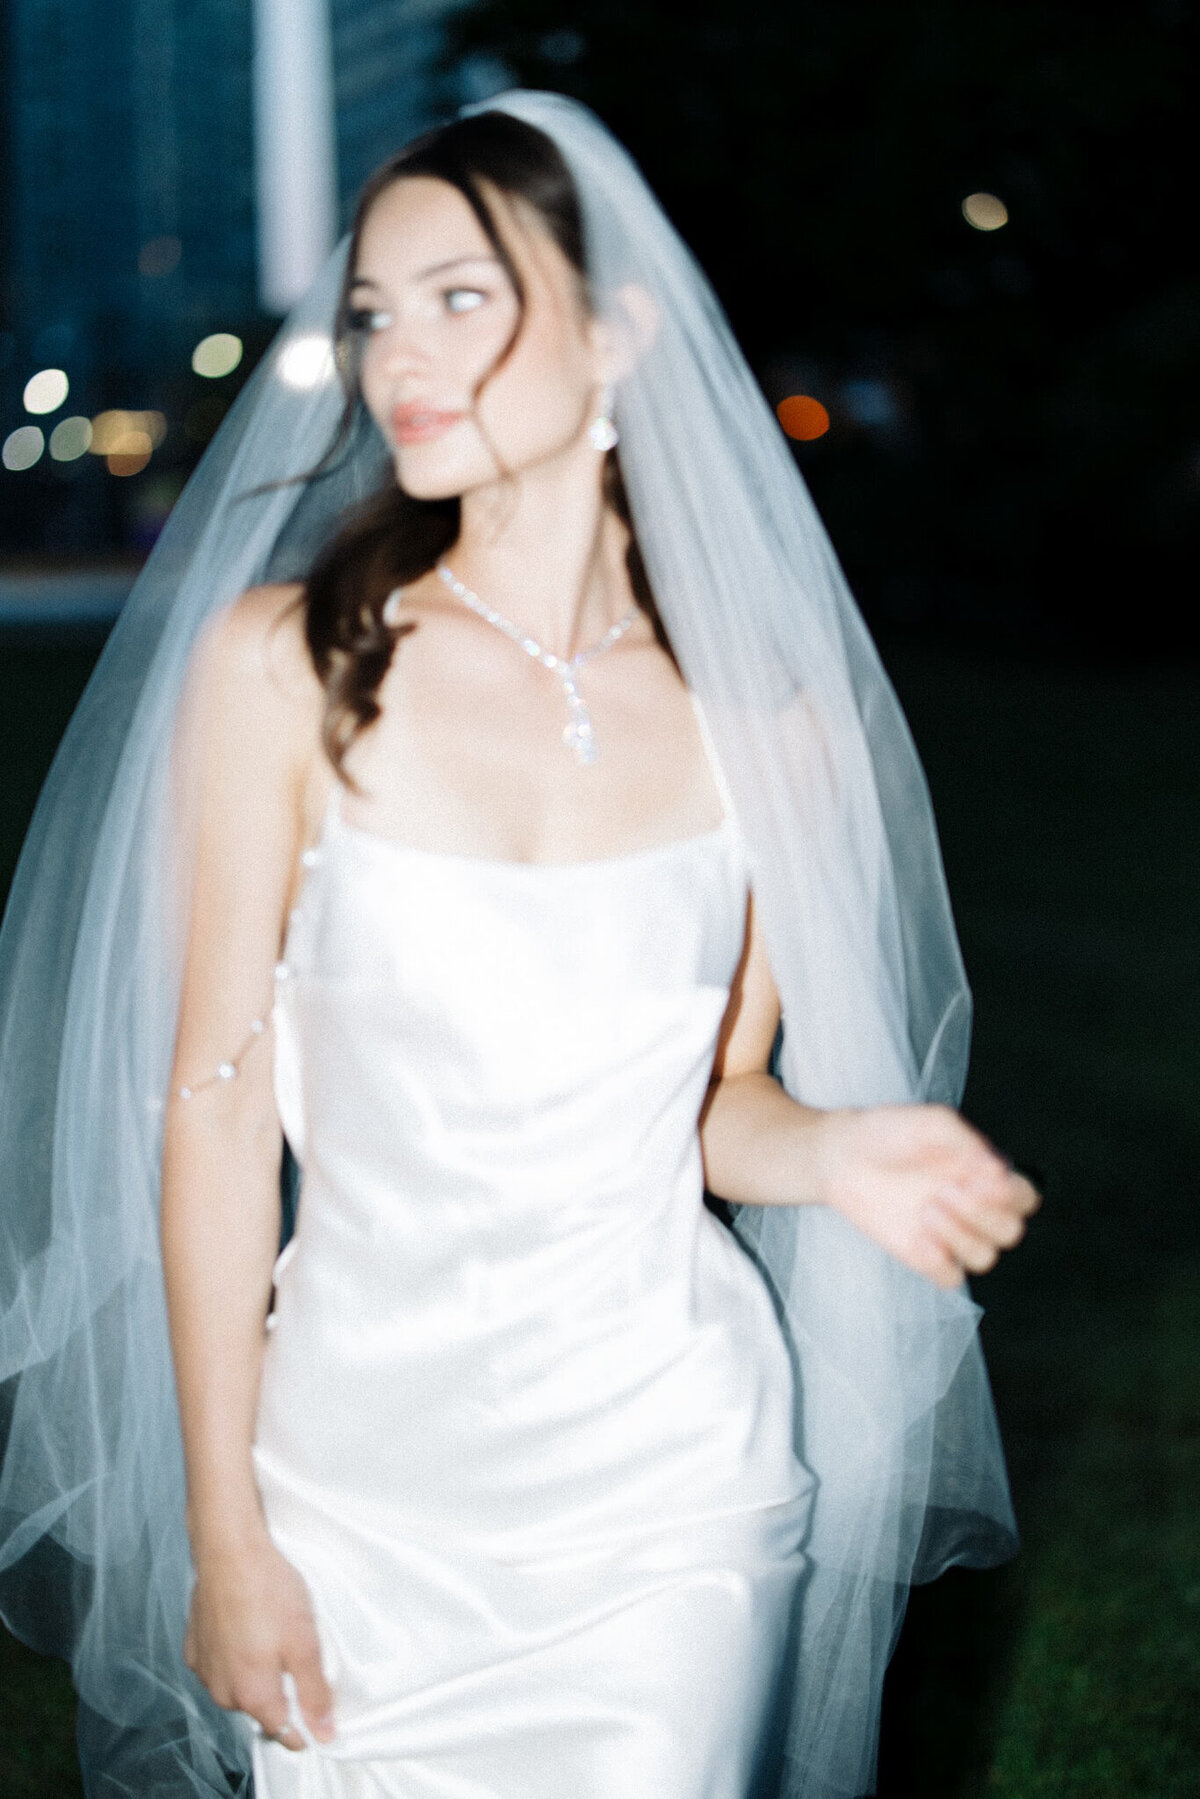 Classic long veil by Blair Nadeau Bridal Adornments, romantic and modern wedding jewelry based in Brampton.  Featured on the Brontë Bride Vendor Guide.